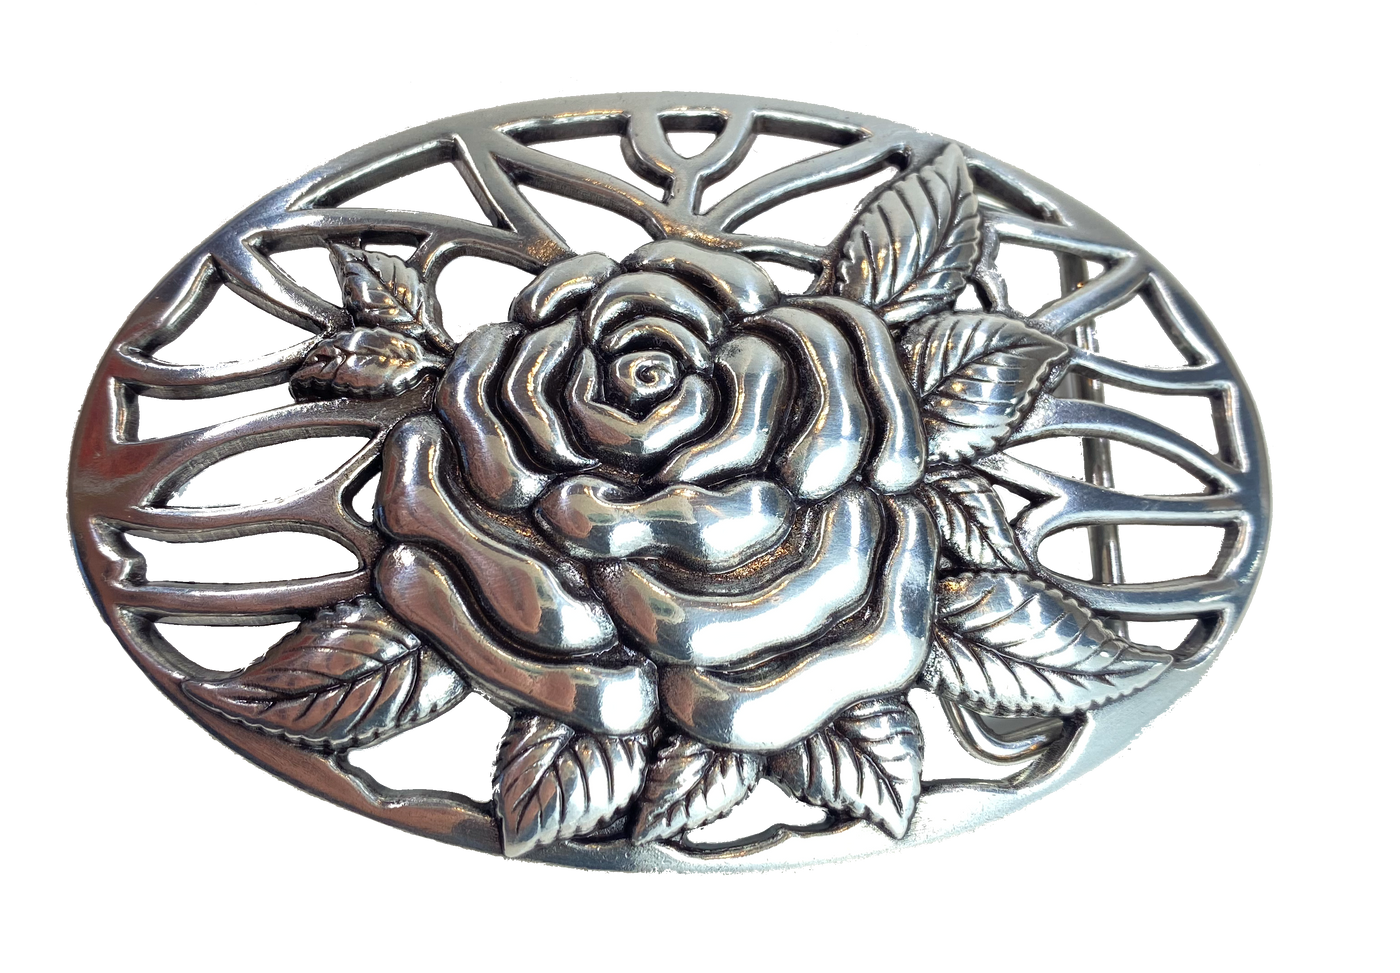 A Filigreed Rose design in Antique Nickel that looks great on plain 1 1/2" Black or Brown belt. A easy to wear oval shape that's not too big, measures approx. 3 7/8" wide by 2 1/2" tall. Imported